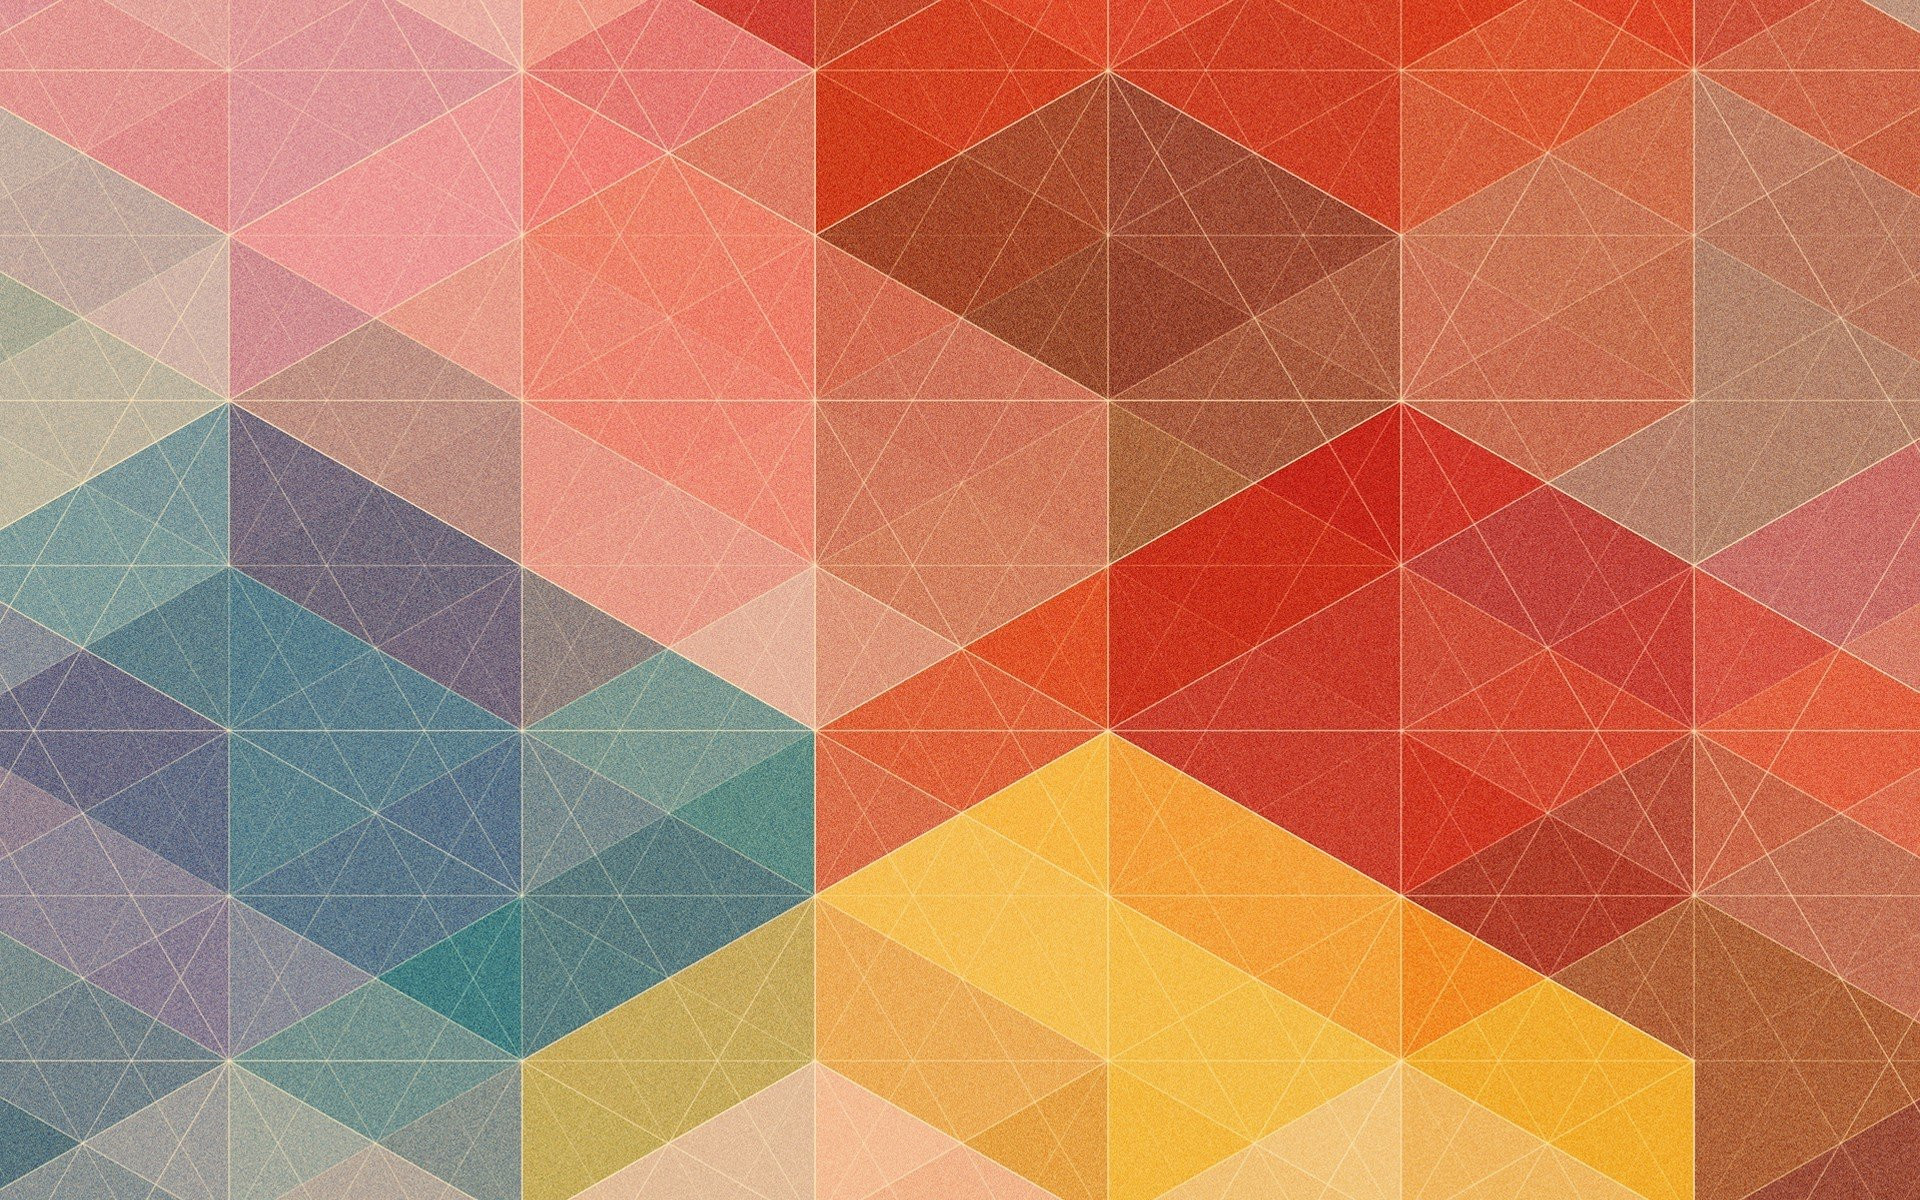 1920x1200 Geometric Shapes Wallpaper Avec 50 Rich And Colorful Geometric Wallpapers  For Your Mobile Devices Idees Et Geometric Shapes Design Wallpaper 3 Avec  ...